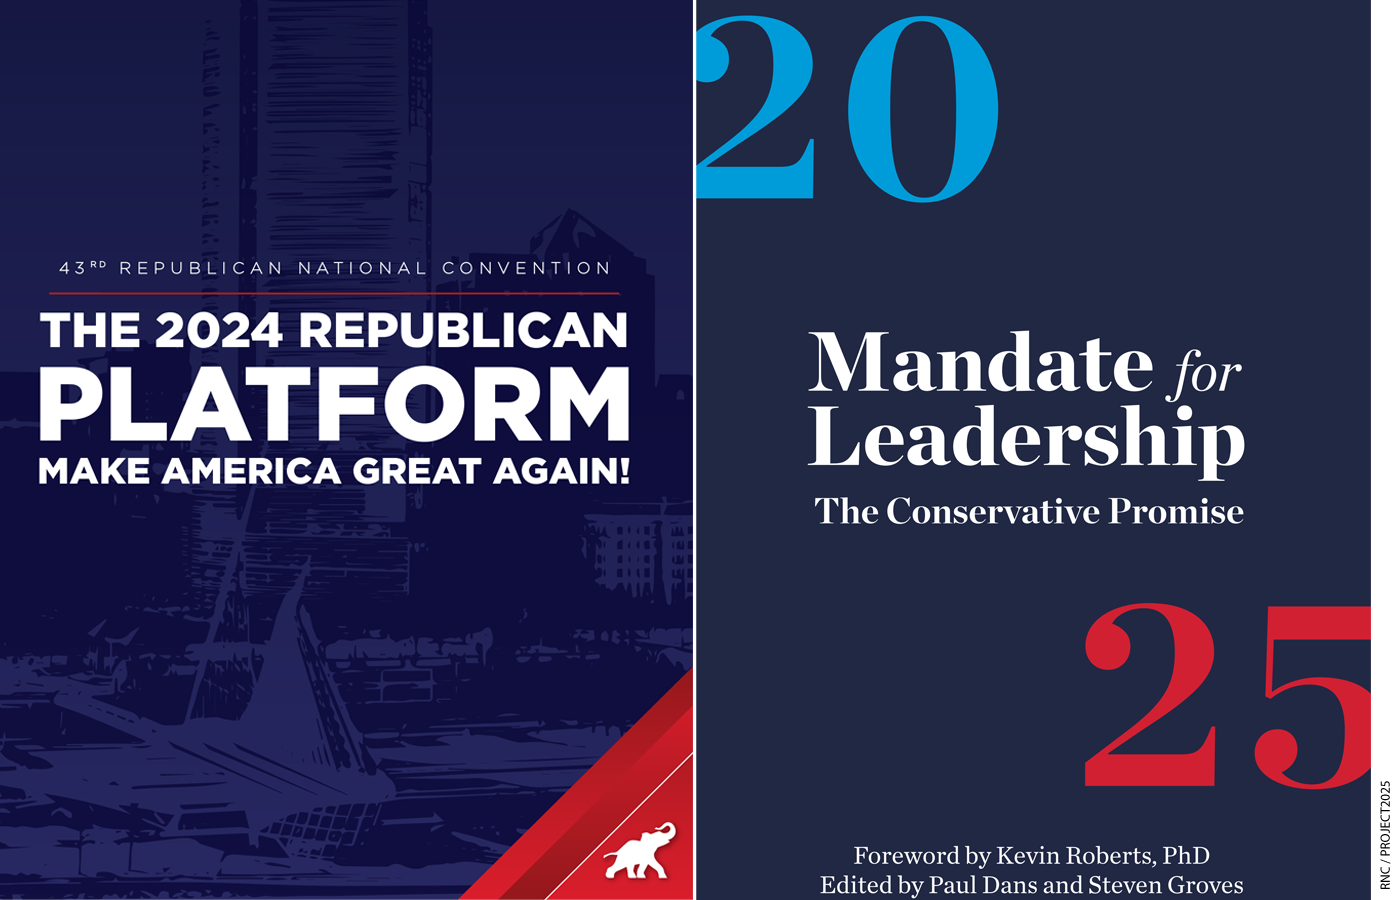 Covers of RNC platform and Project 2025